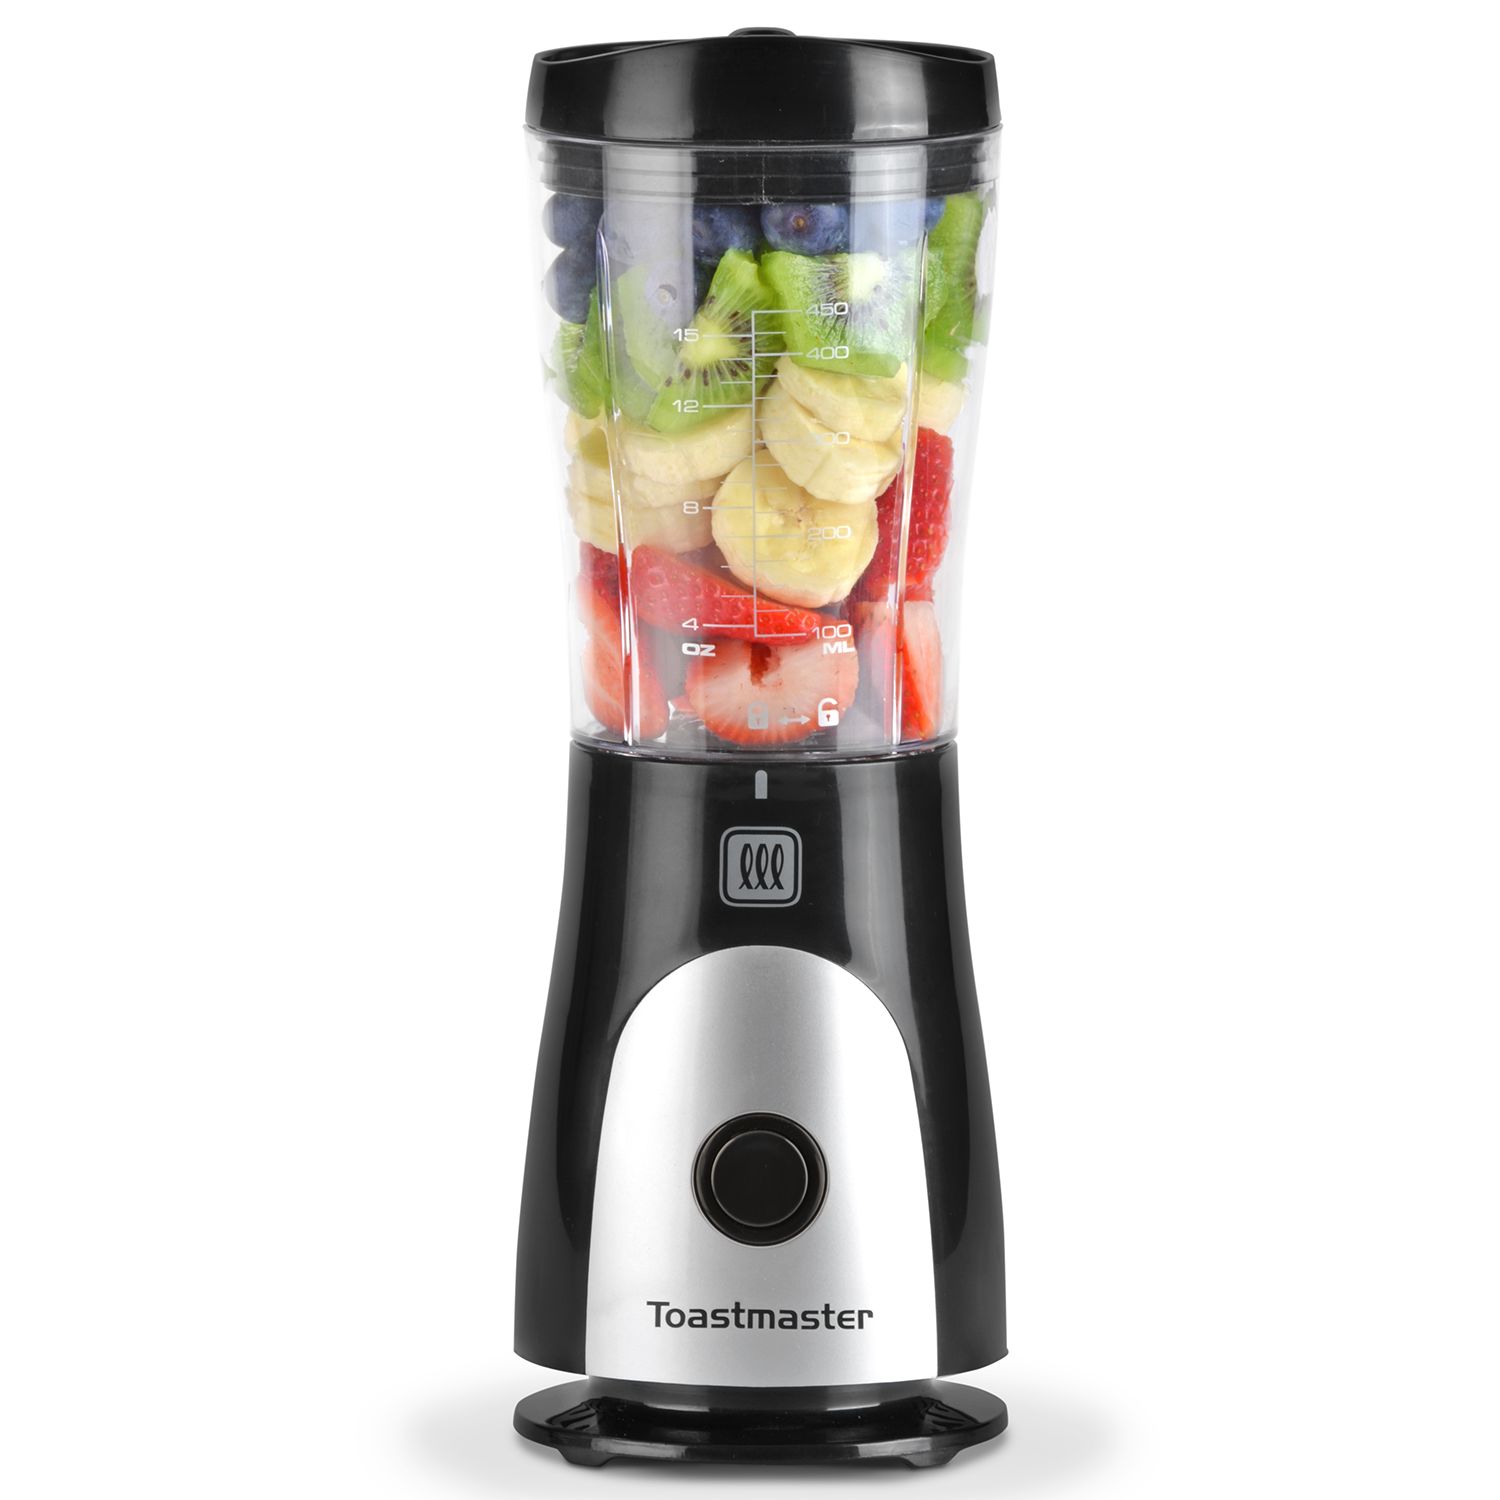 Kenmore Elite 5 Speed 64 oz Personal Blender With Travel Cup